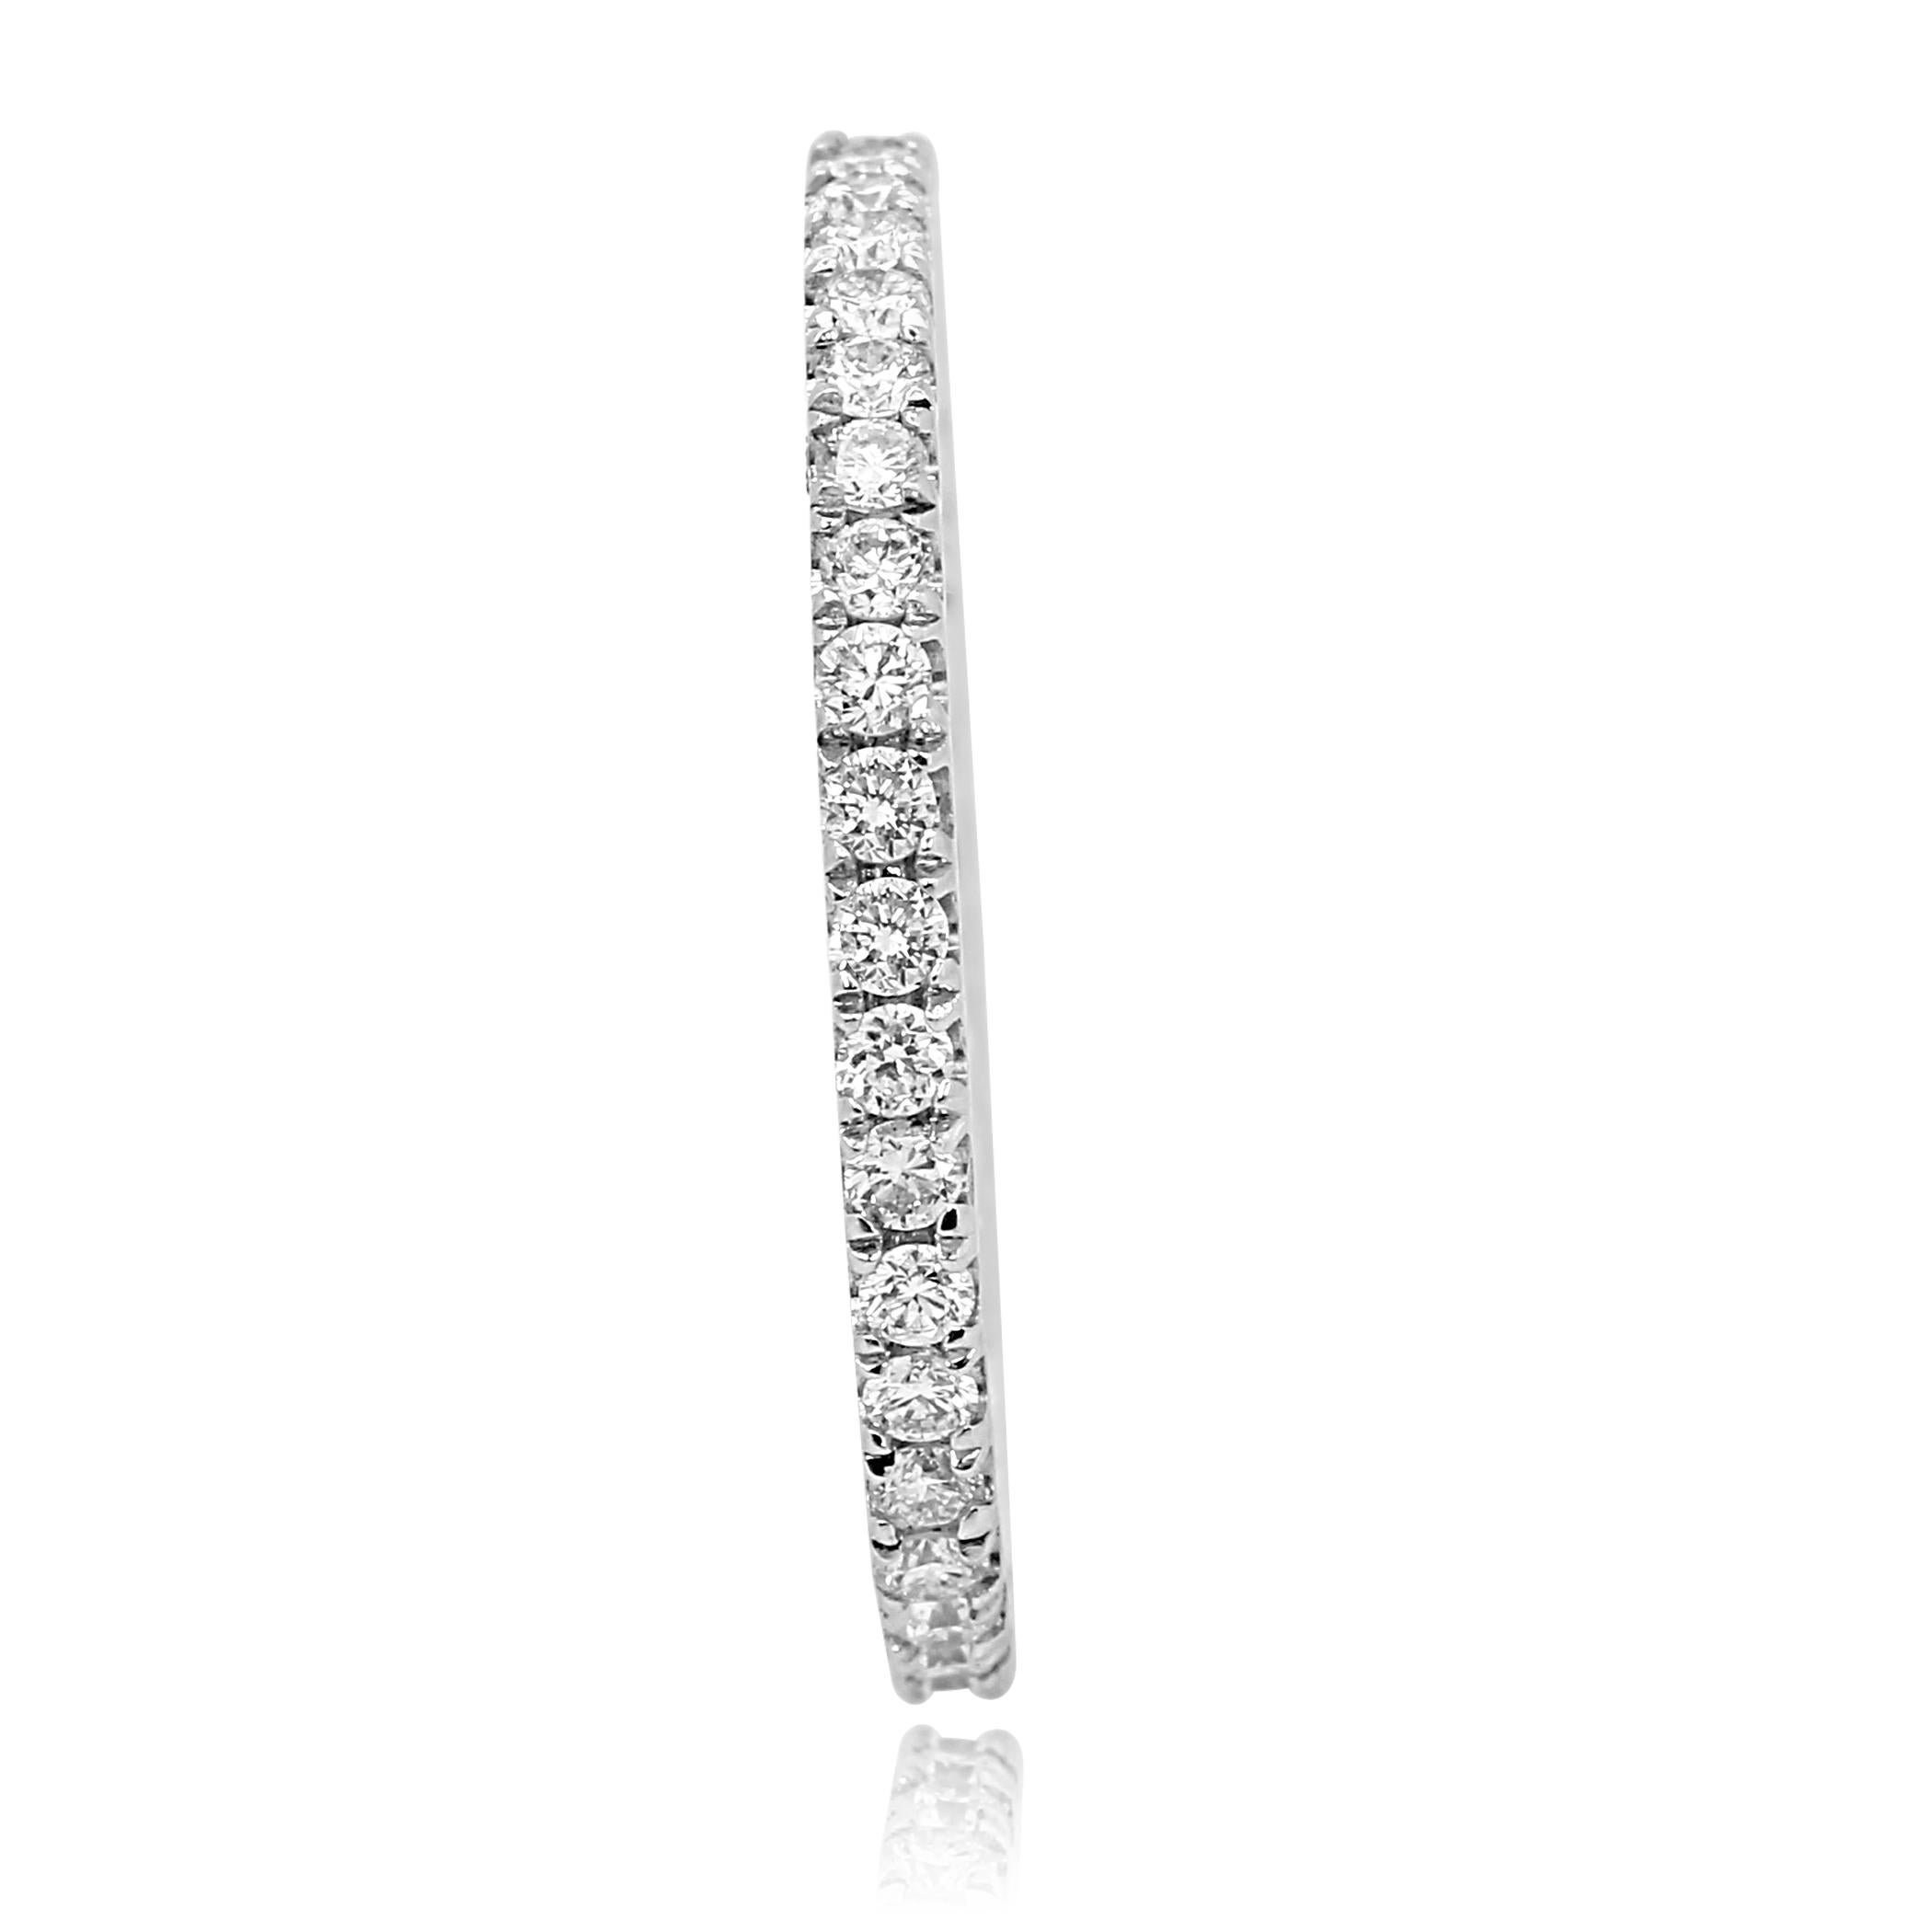 Colorless Round Brilliant VS-SI quality Diamonds set 0.56 Carat in 14K White Gold Bridal Eternity Band Ring.

Total Diamond Weight 0.56 Carat